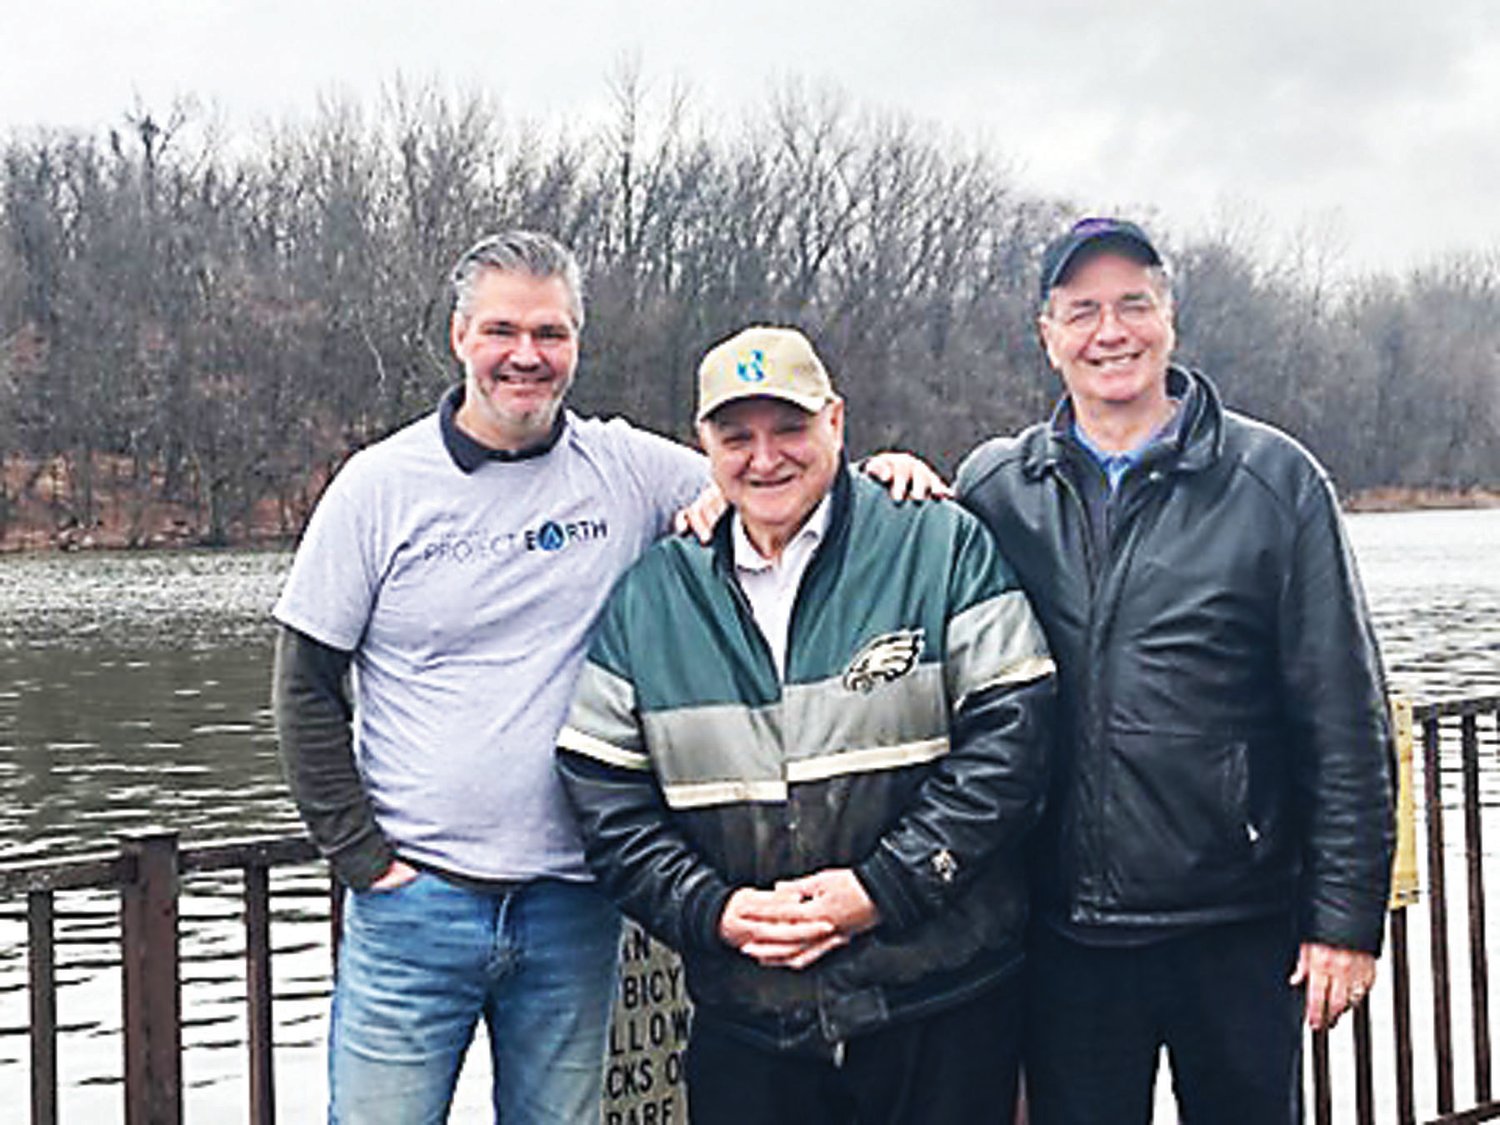 From left are Robert Catalano, Joe Abate and Dave Babula near the Delaware River in Burlington City, with Burlington Island in the background.